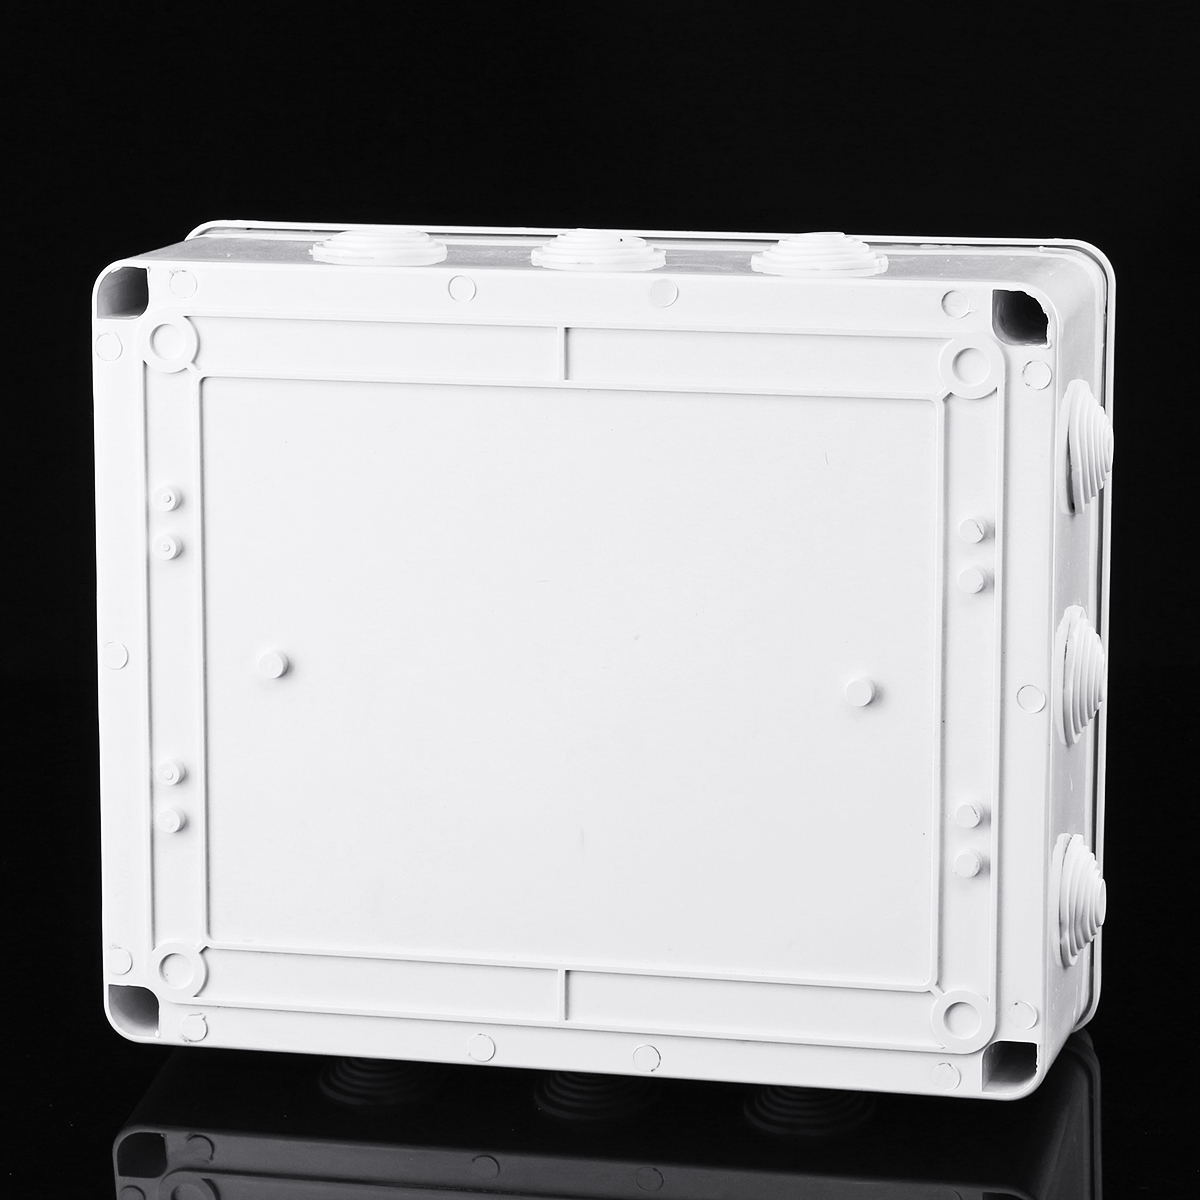 ABS-IP65-Large-Waterproof-Junction-Box-Universal-Electrical-Tool-Enclosure-Cable-Case-1543728-6